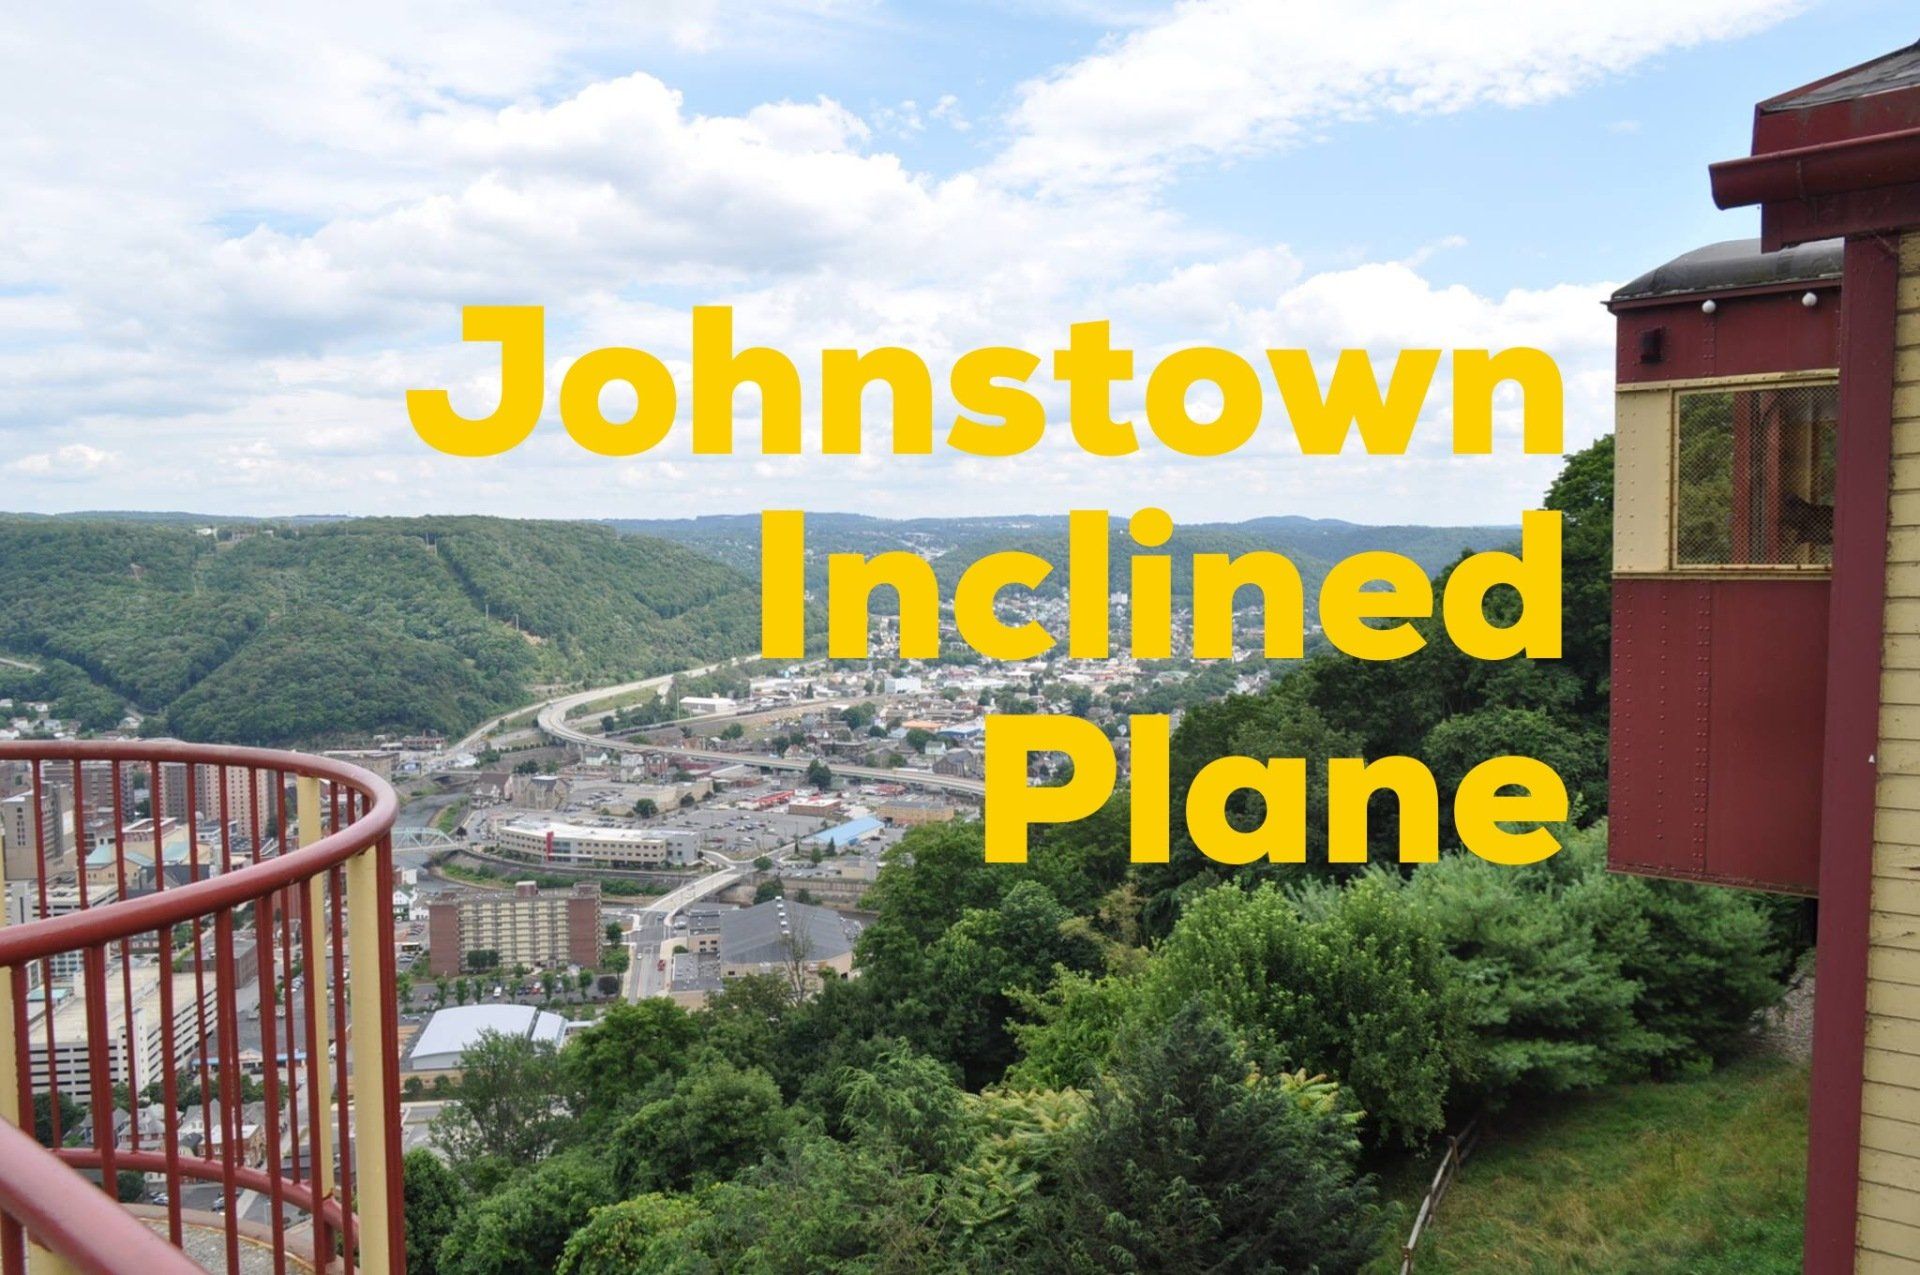 Johnstown Incline Plane, Johnstown PA, featured business of the Lorain/Stonycreek hiking trails